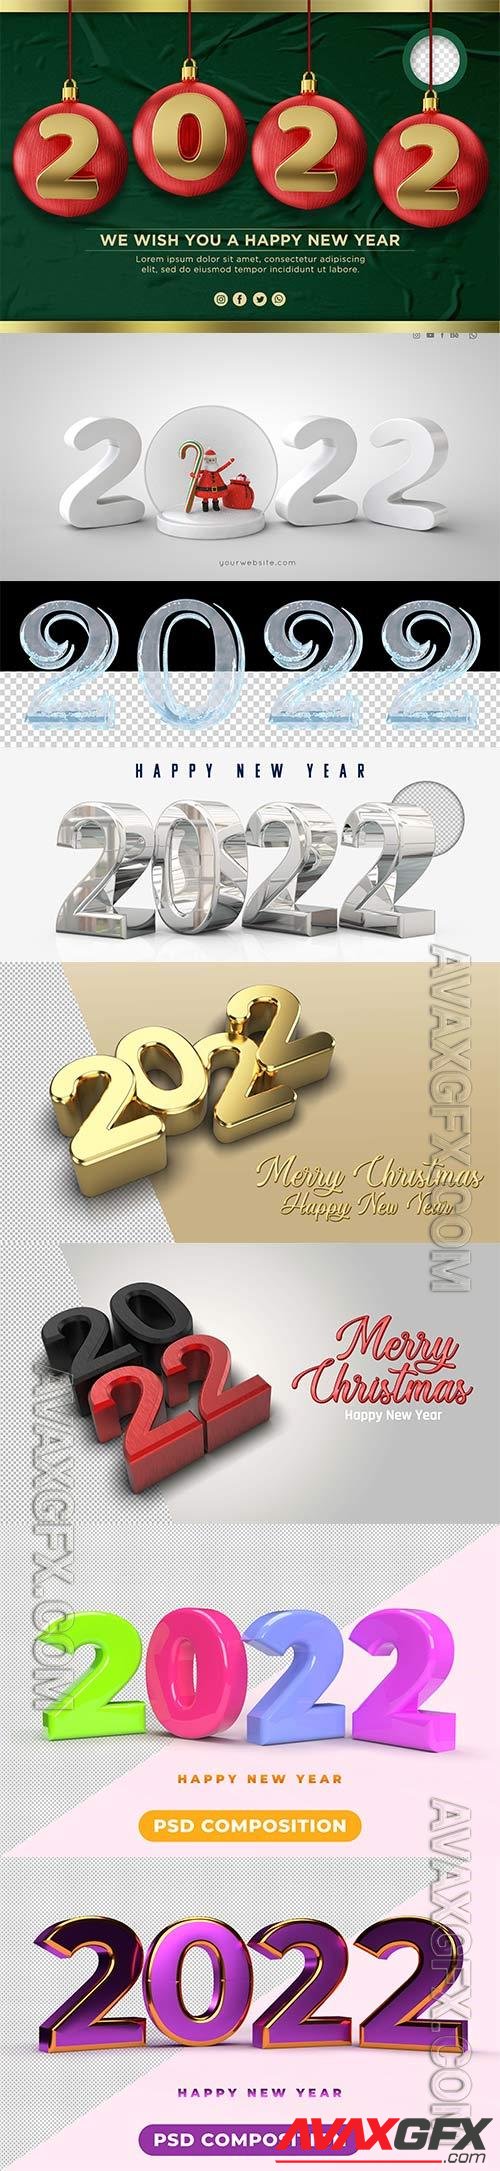 2022 letters 3d illustration isolated premium psd